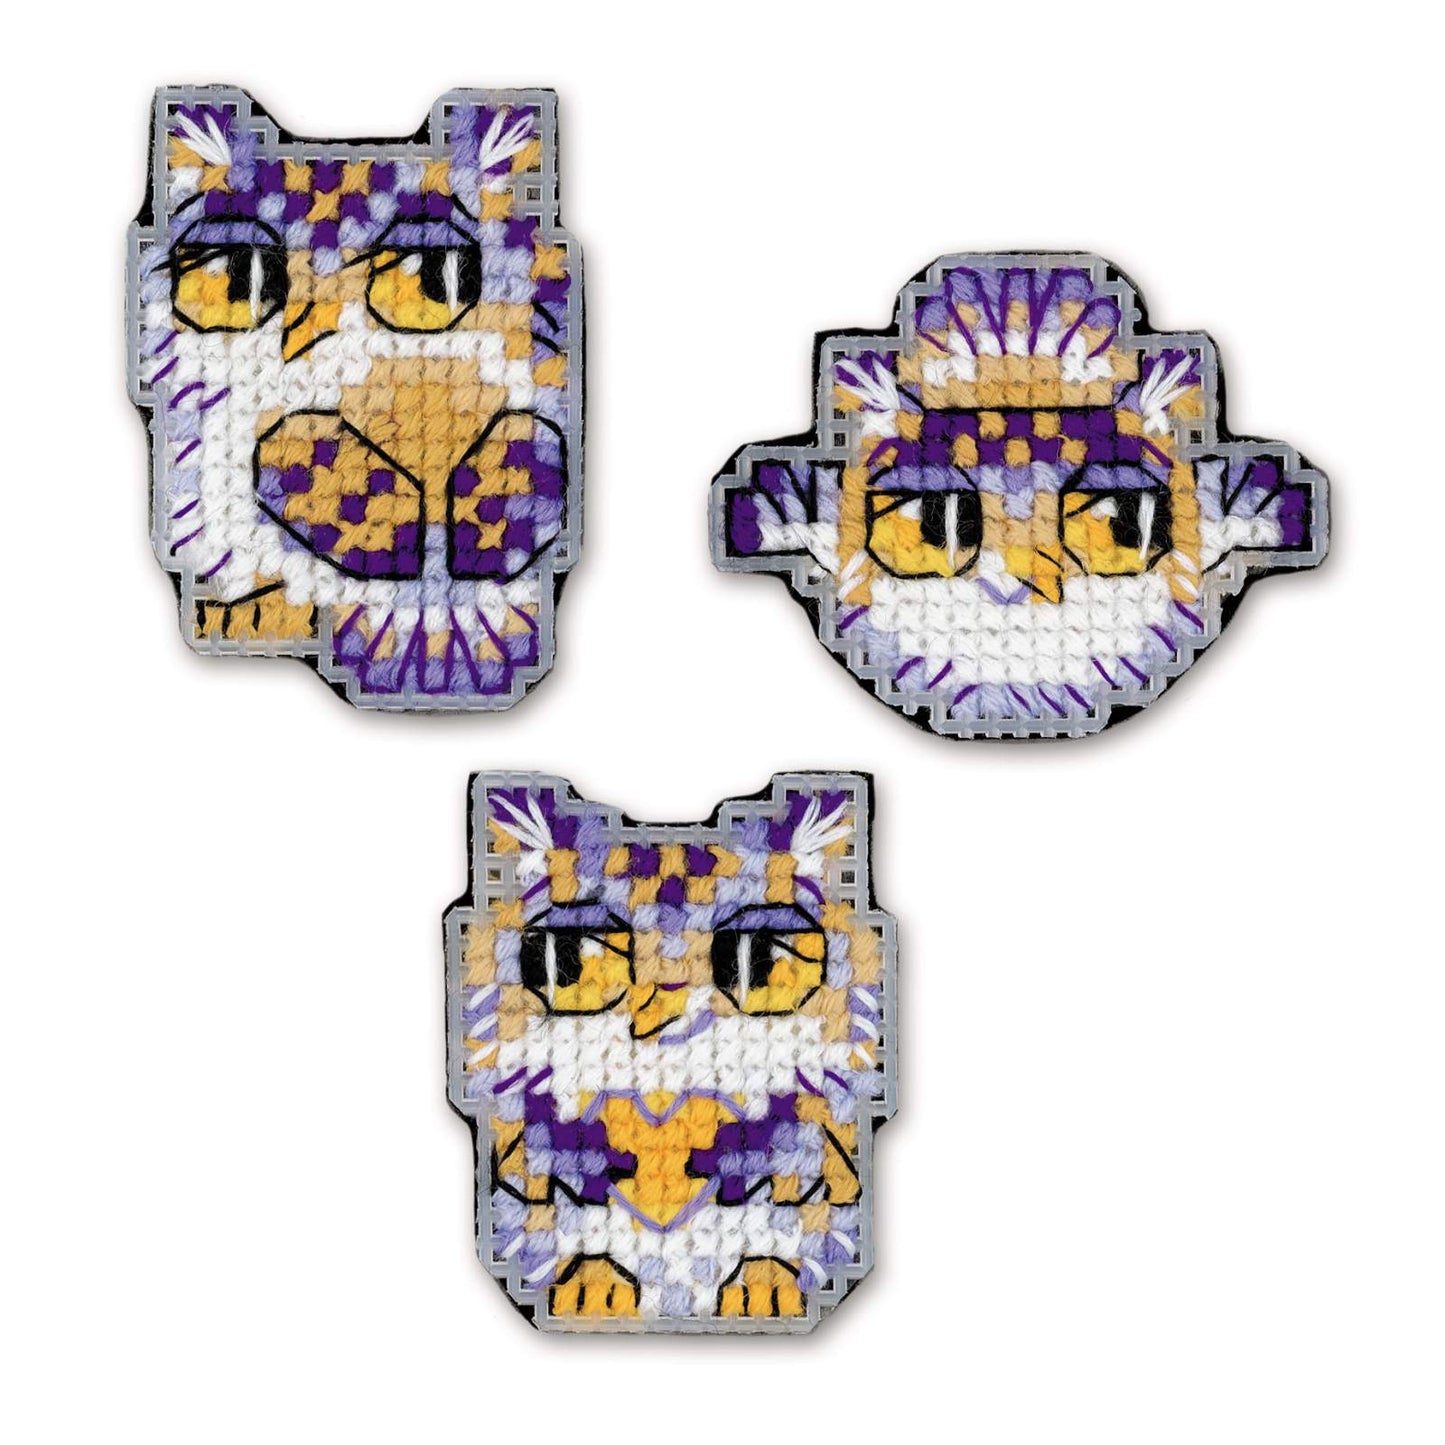 Owlets Magnets counted cross stitch kit